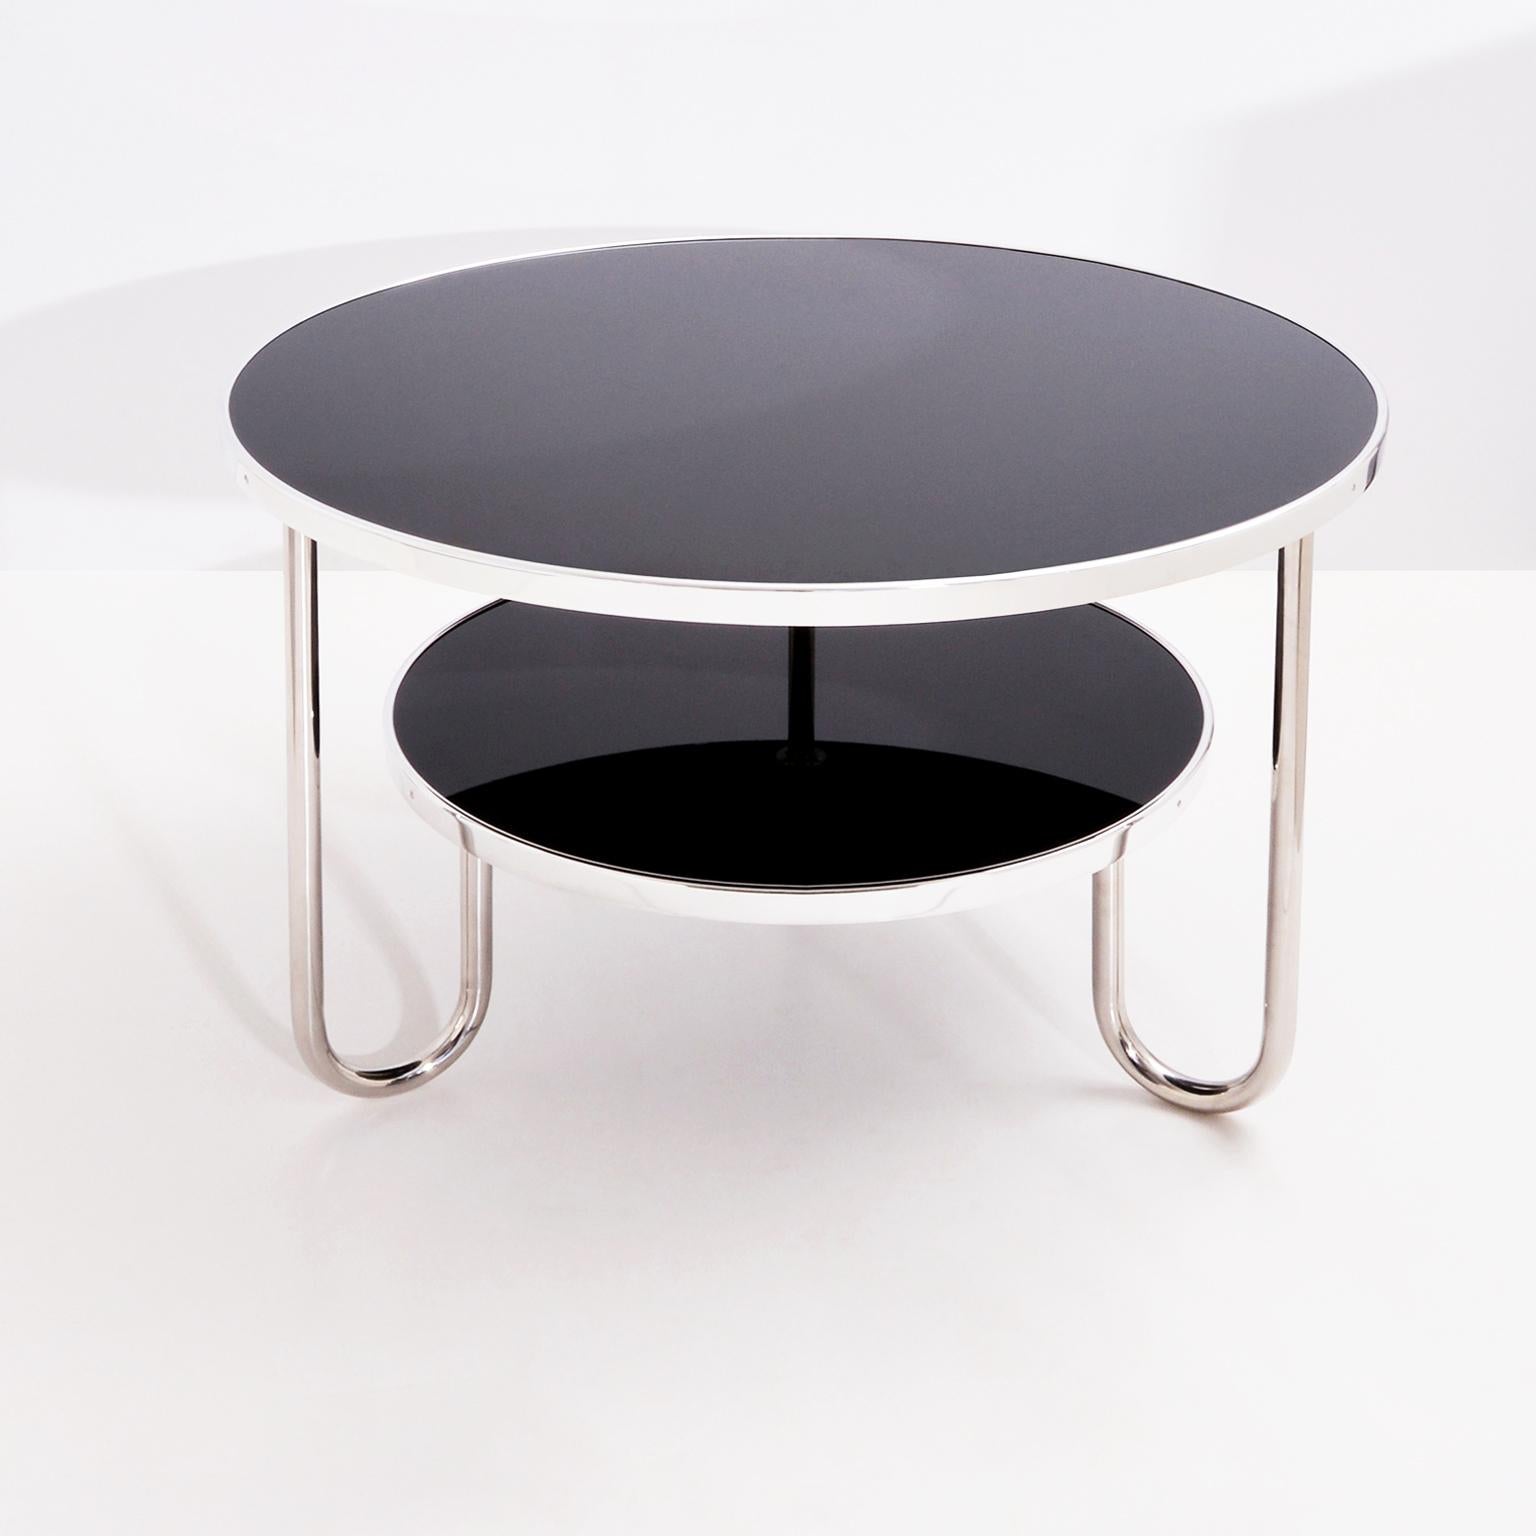 Contemporary Modernist Round Coffee Table, Chromium Plated Tubular Steel, Glass Tops, Germany For Sale